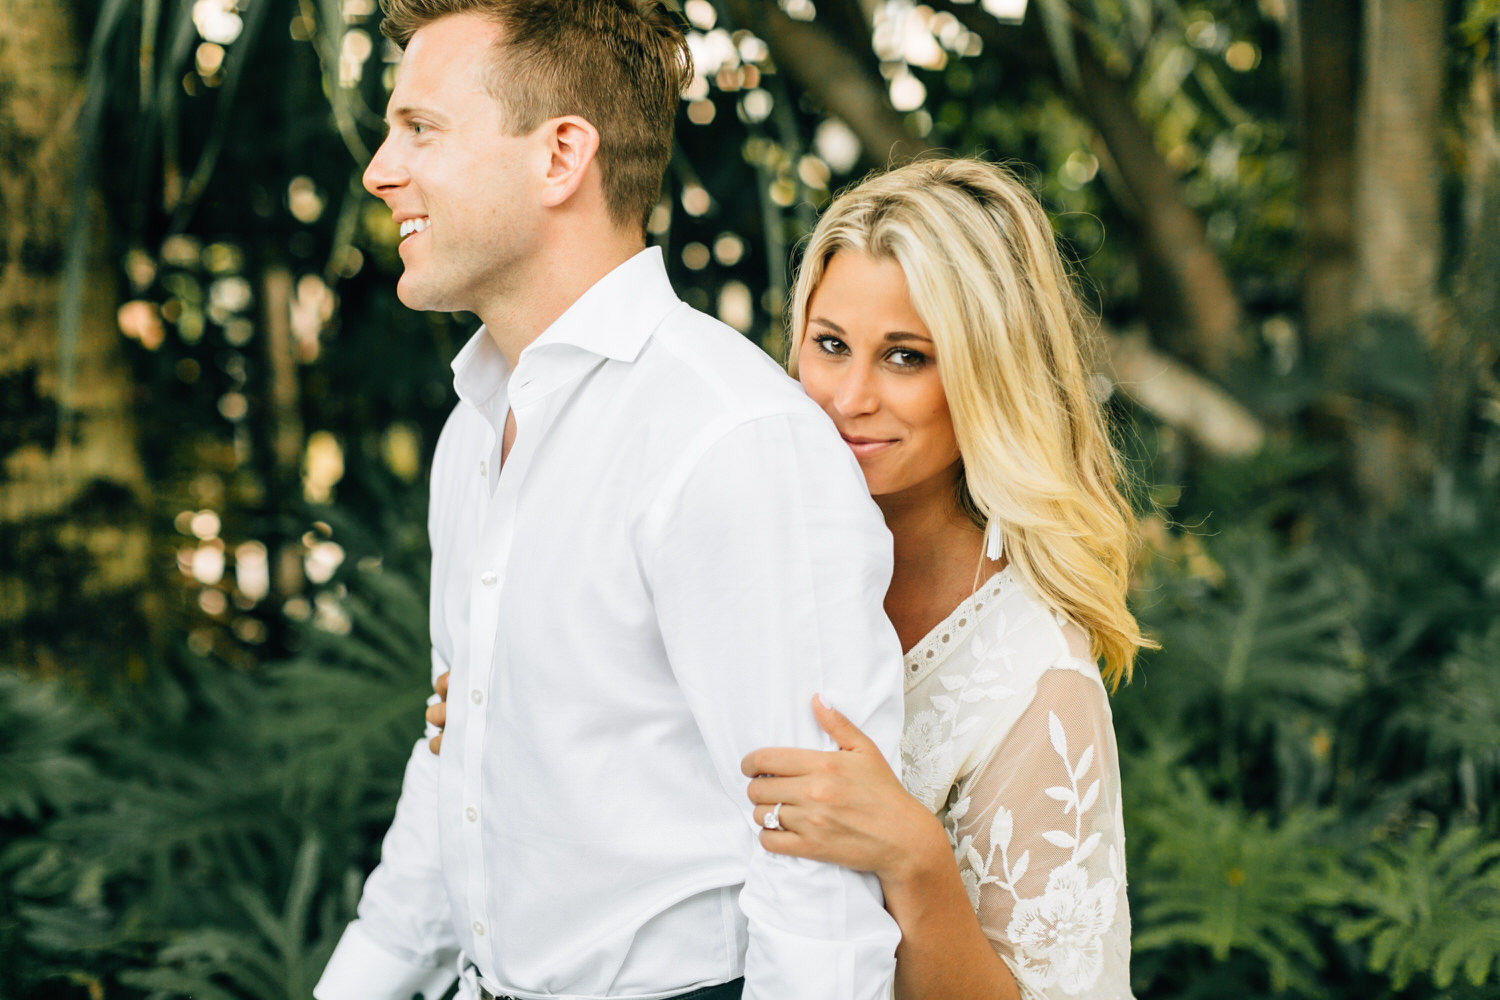 Miami Beach Edition Wedding and Engagement Photography